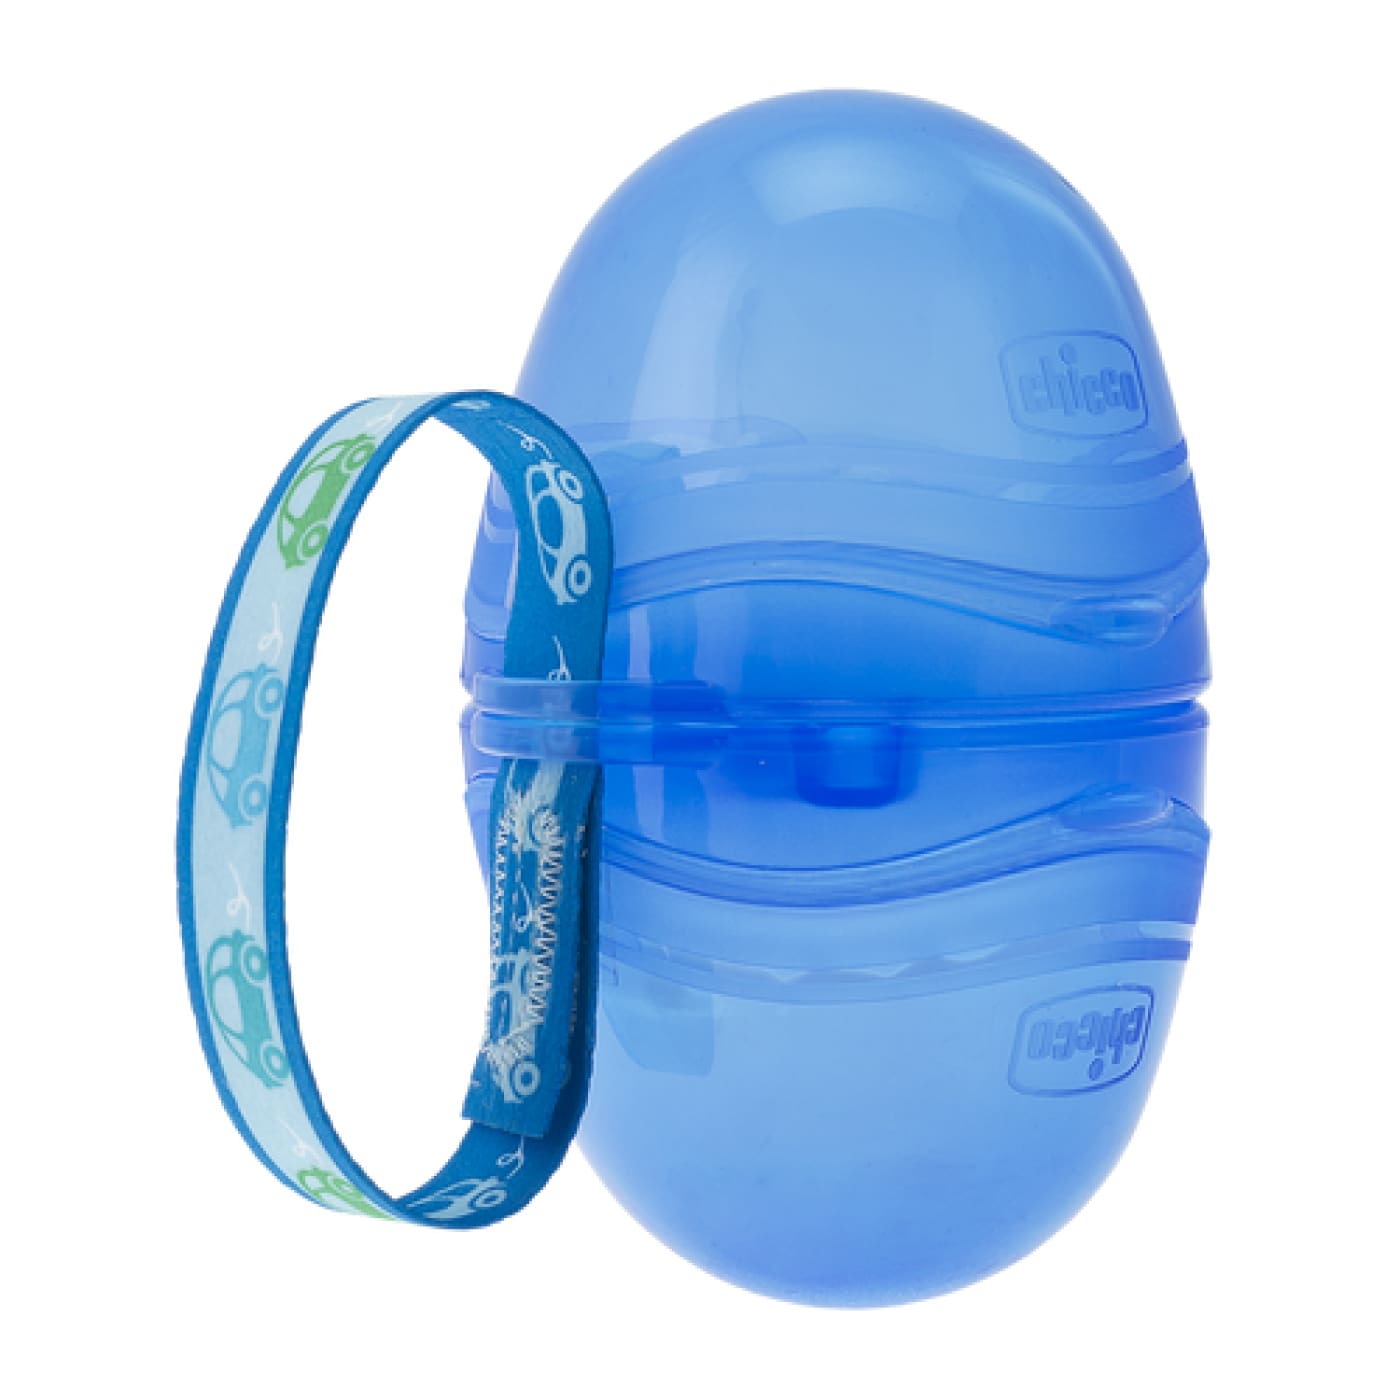 Chicco Double Soother Holder - Blue - NURSING & FEEDING - DUMMIES/SOOTHERS/CLIPS